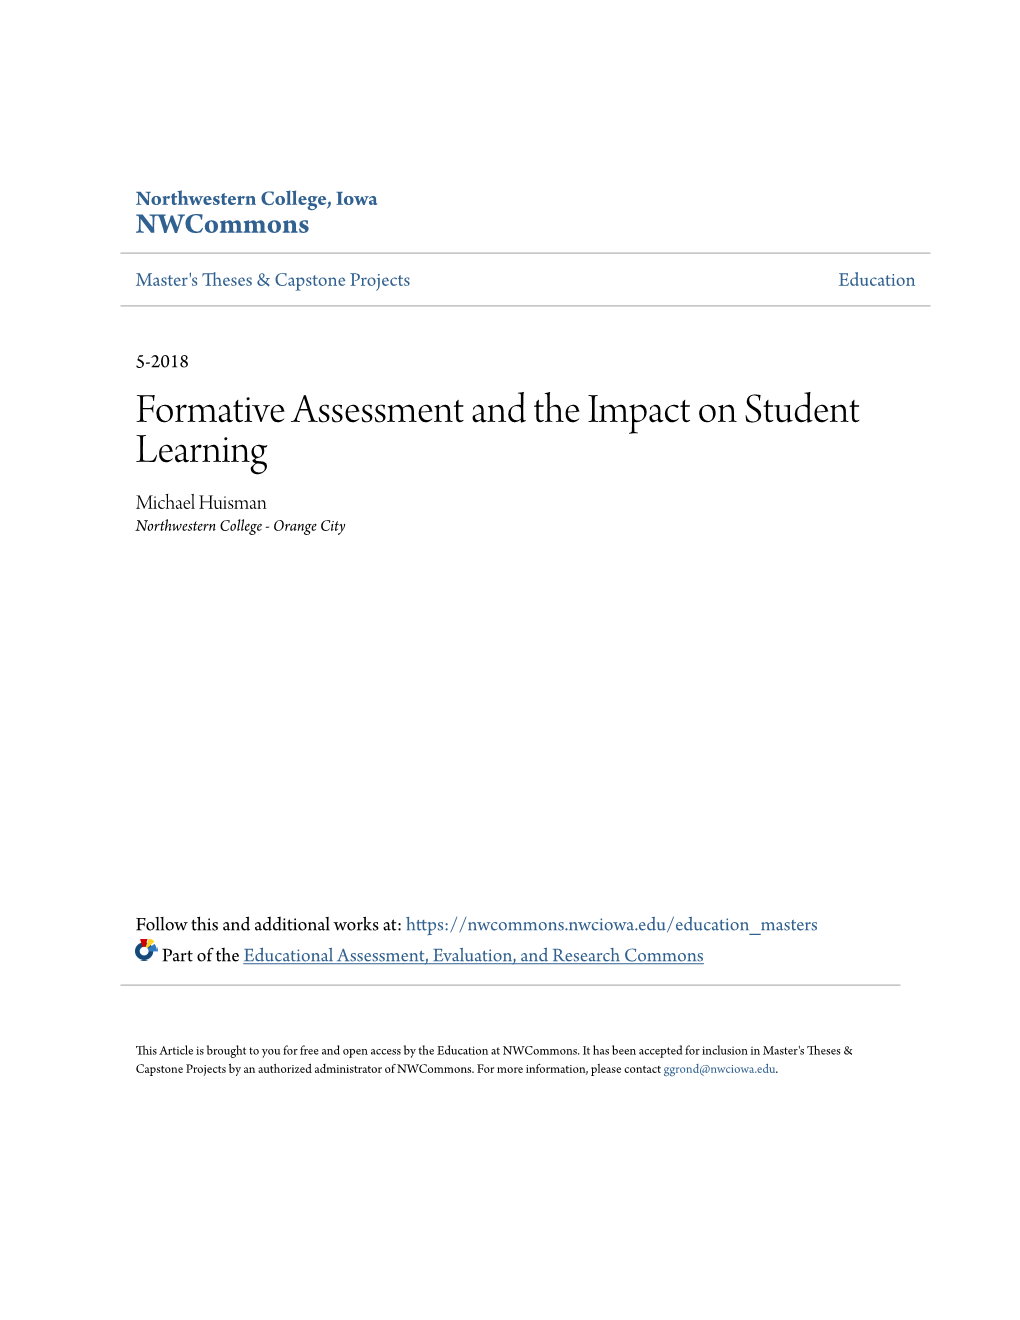 Formative Assessment and the Impact on Student Learning Michael Huisman Northwestern College - Orange City